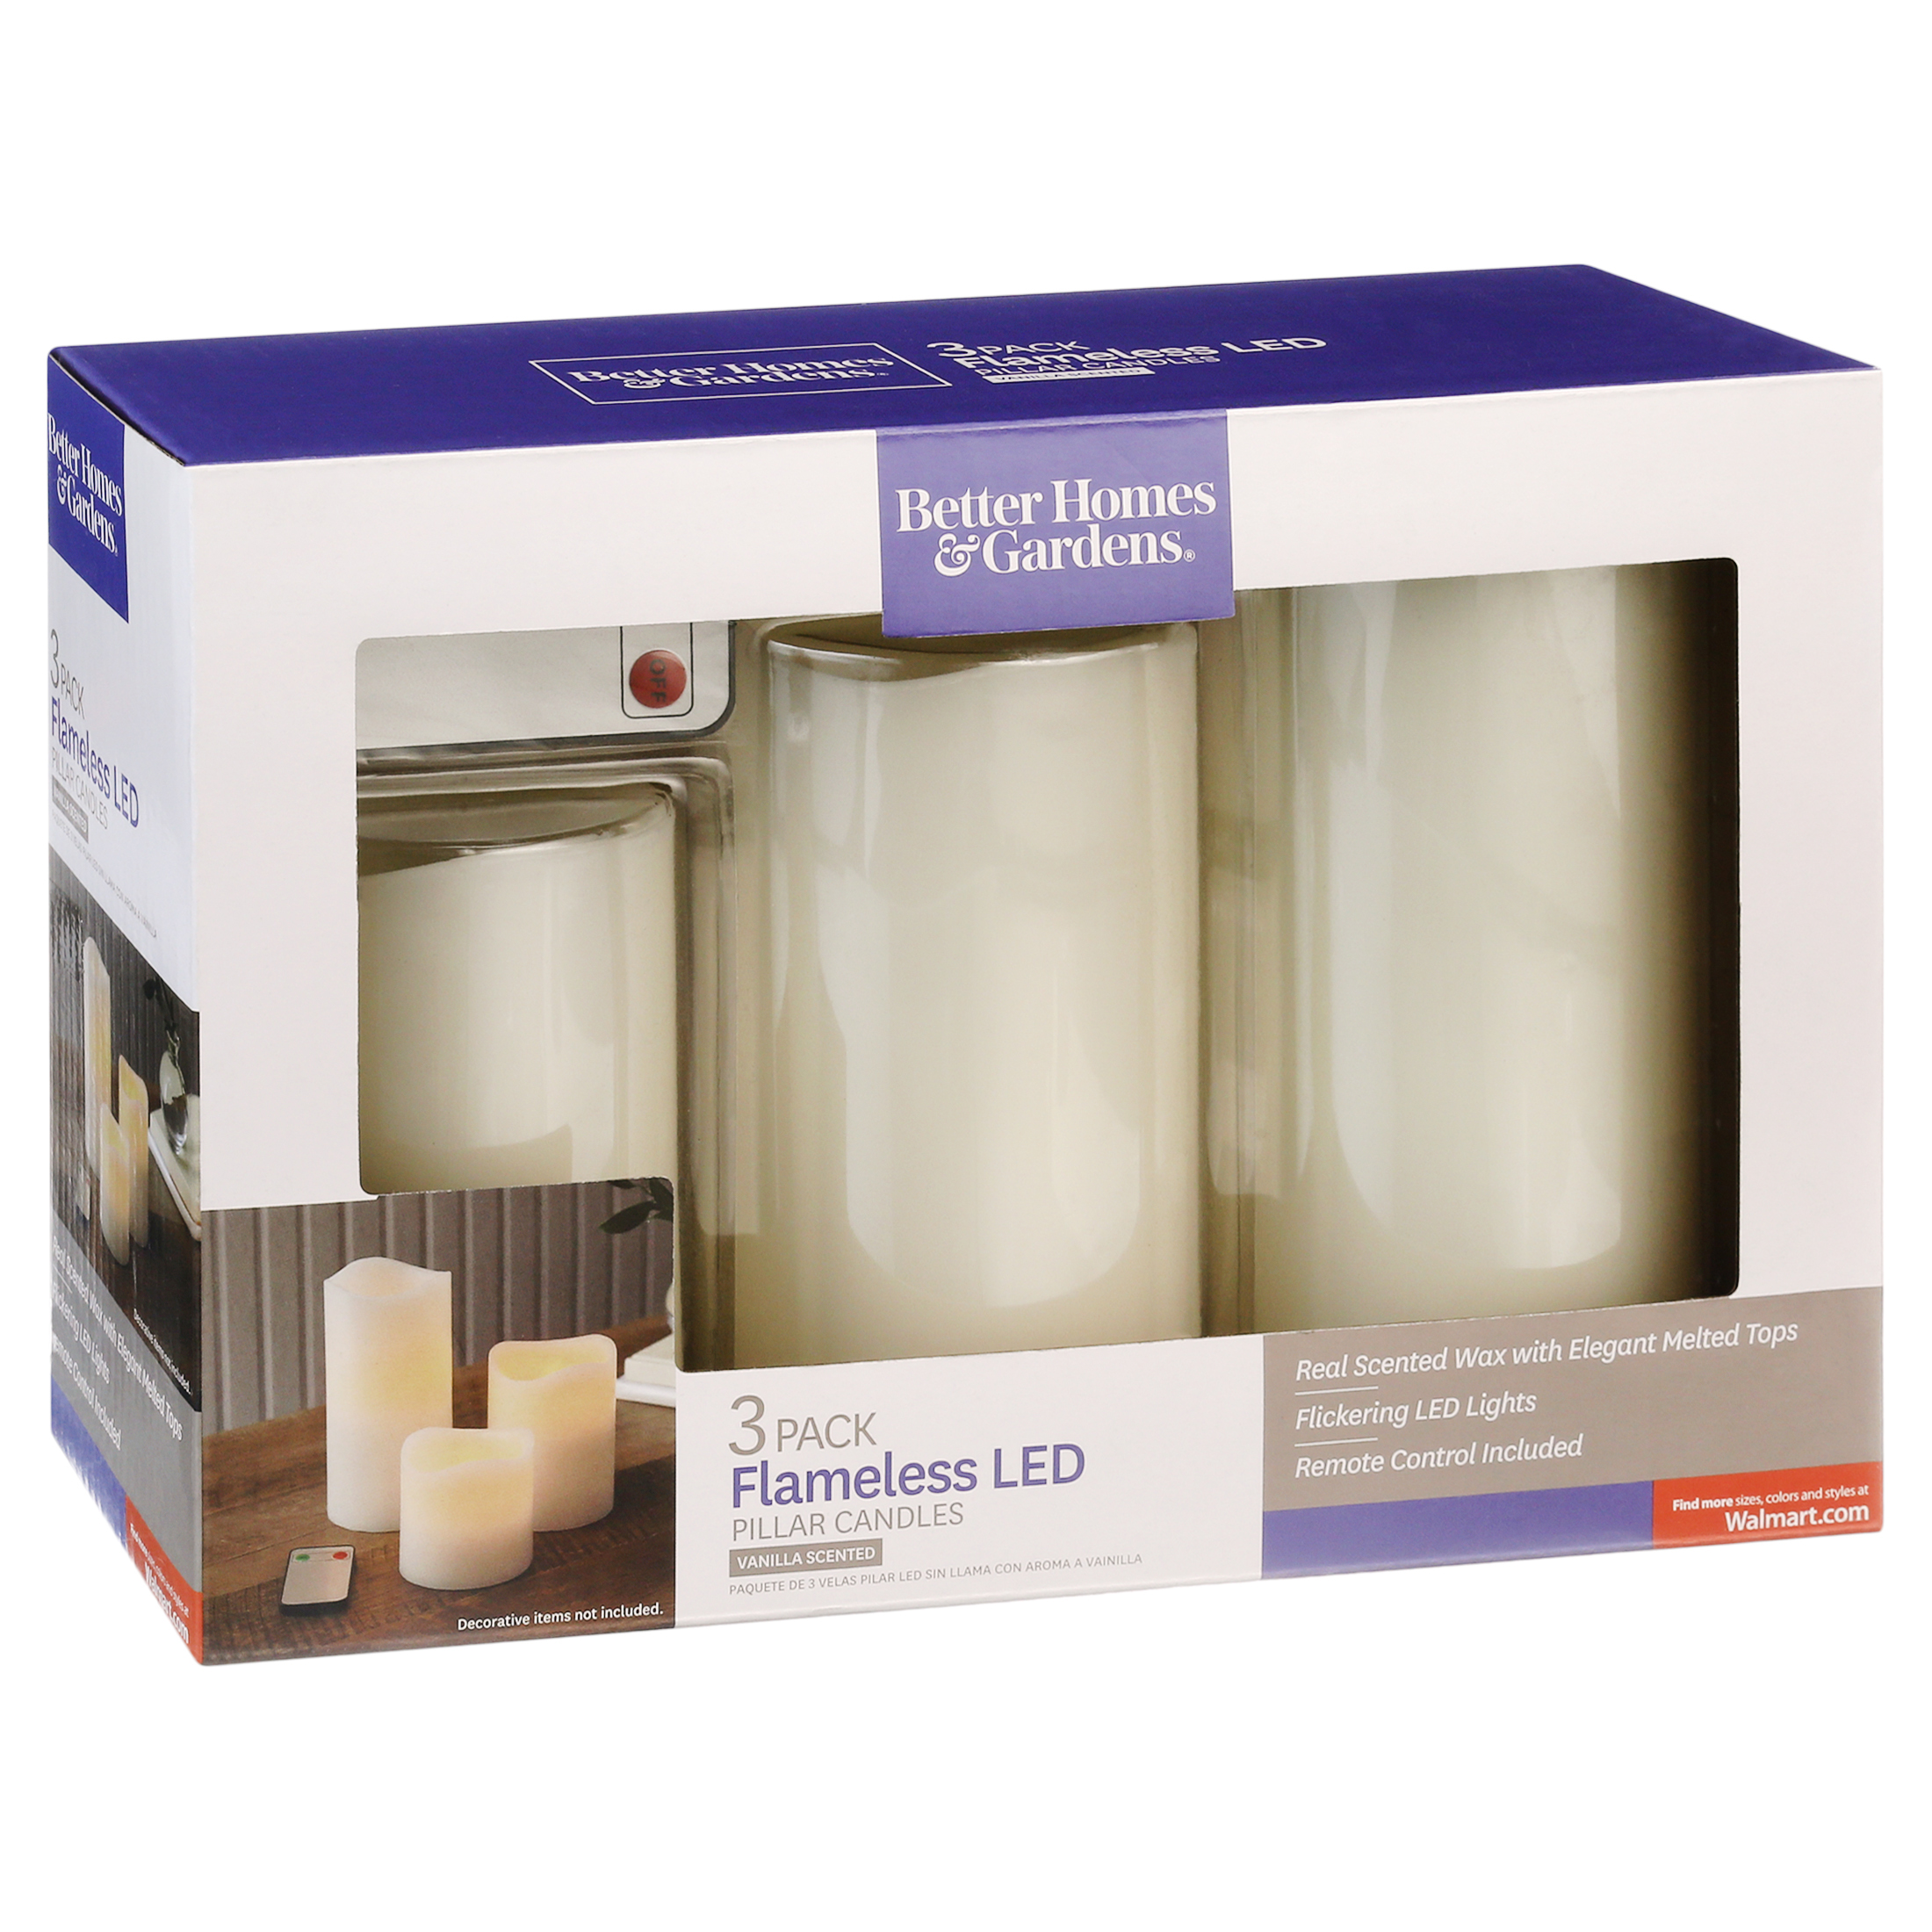 Better Homes & Gardens Flameless LED Pillar Candles 3-Pack Vanilla Scented - image 5 of 9